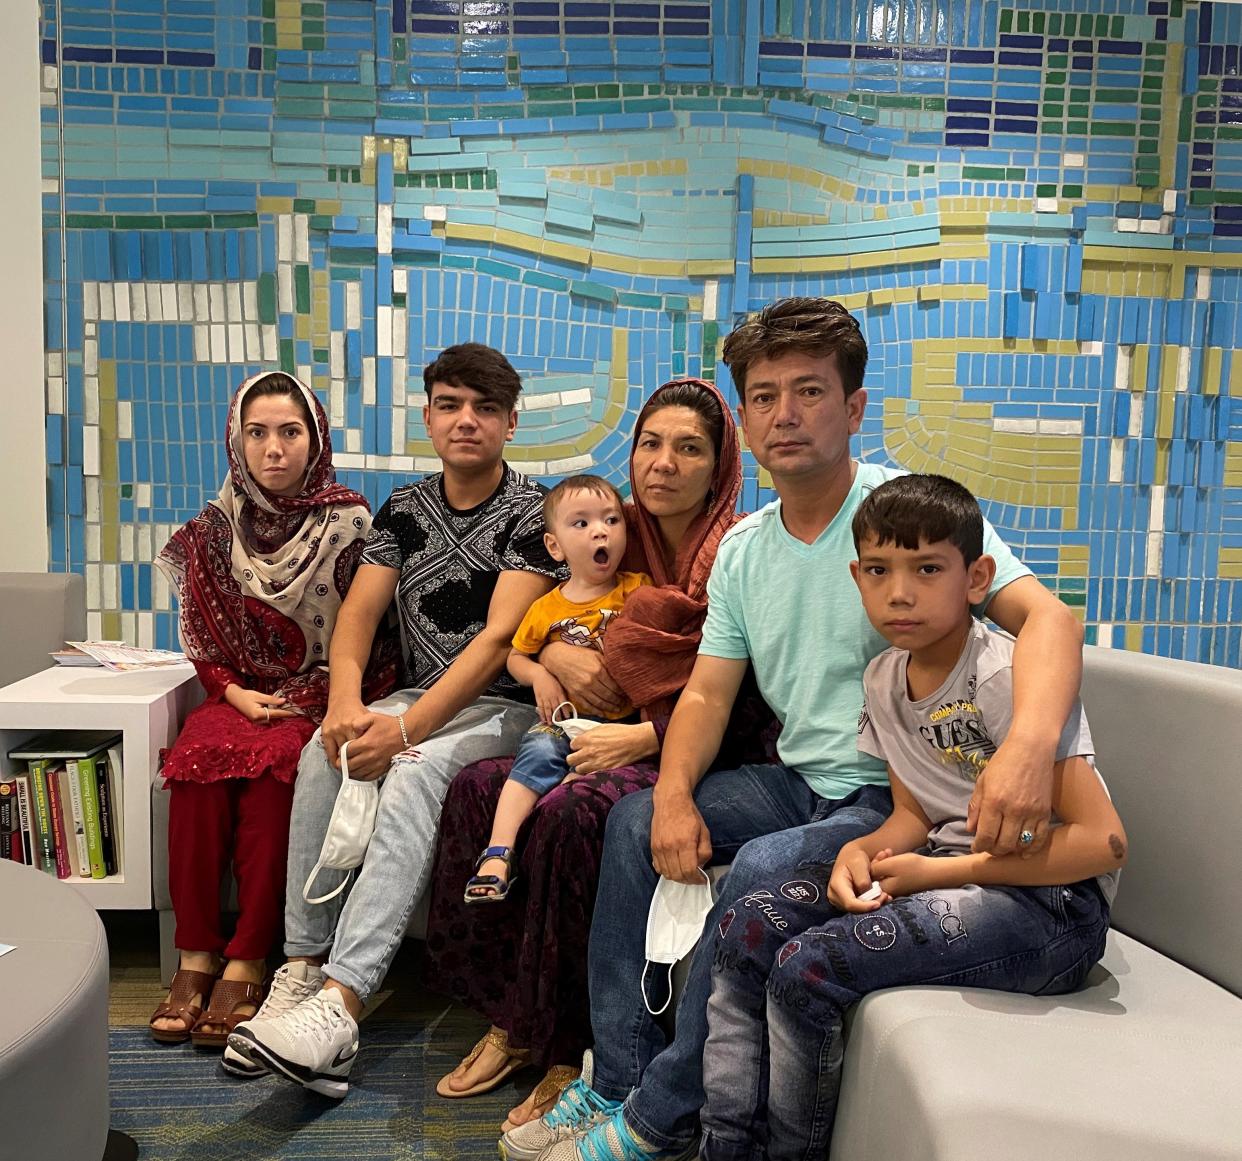 The Ghaznavi family arrived in Jacksonville in mid-August to escape the Taliban and begin a new life in the city.